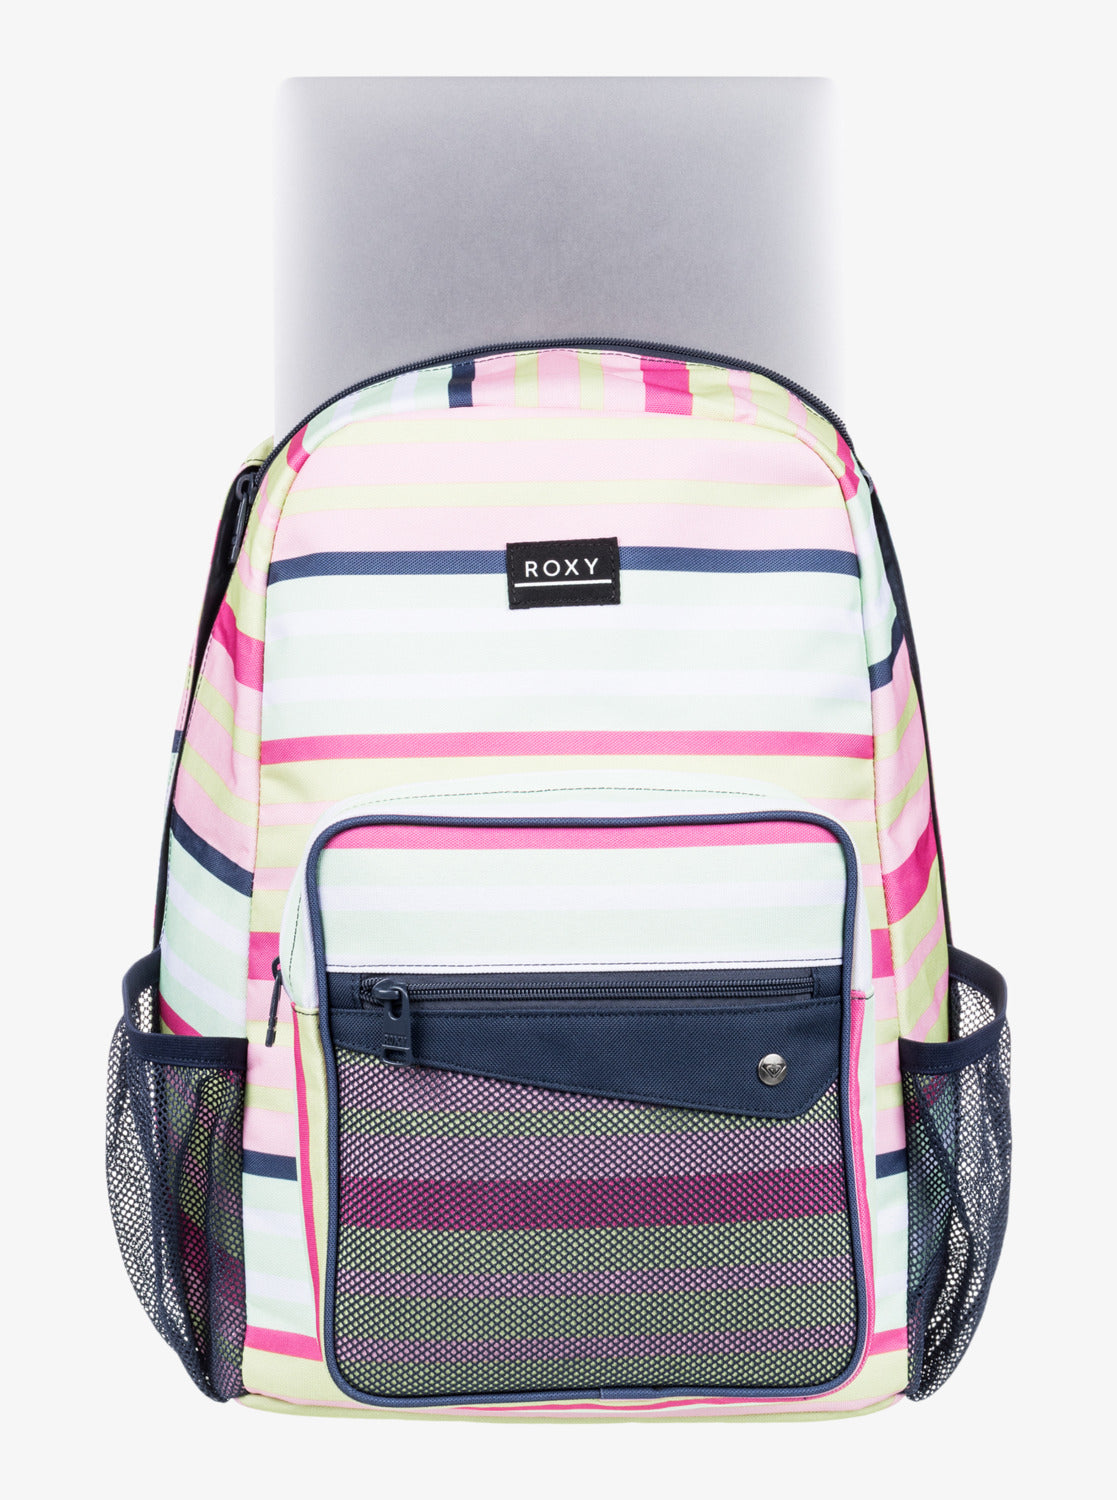 Roxy Best Time Backpack.